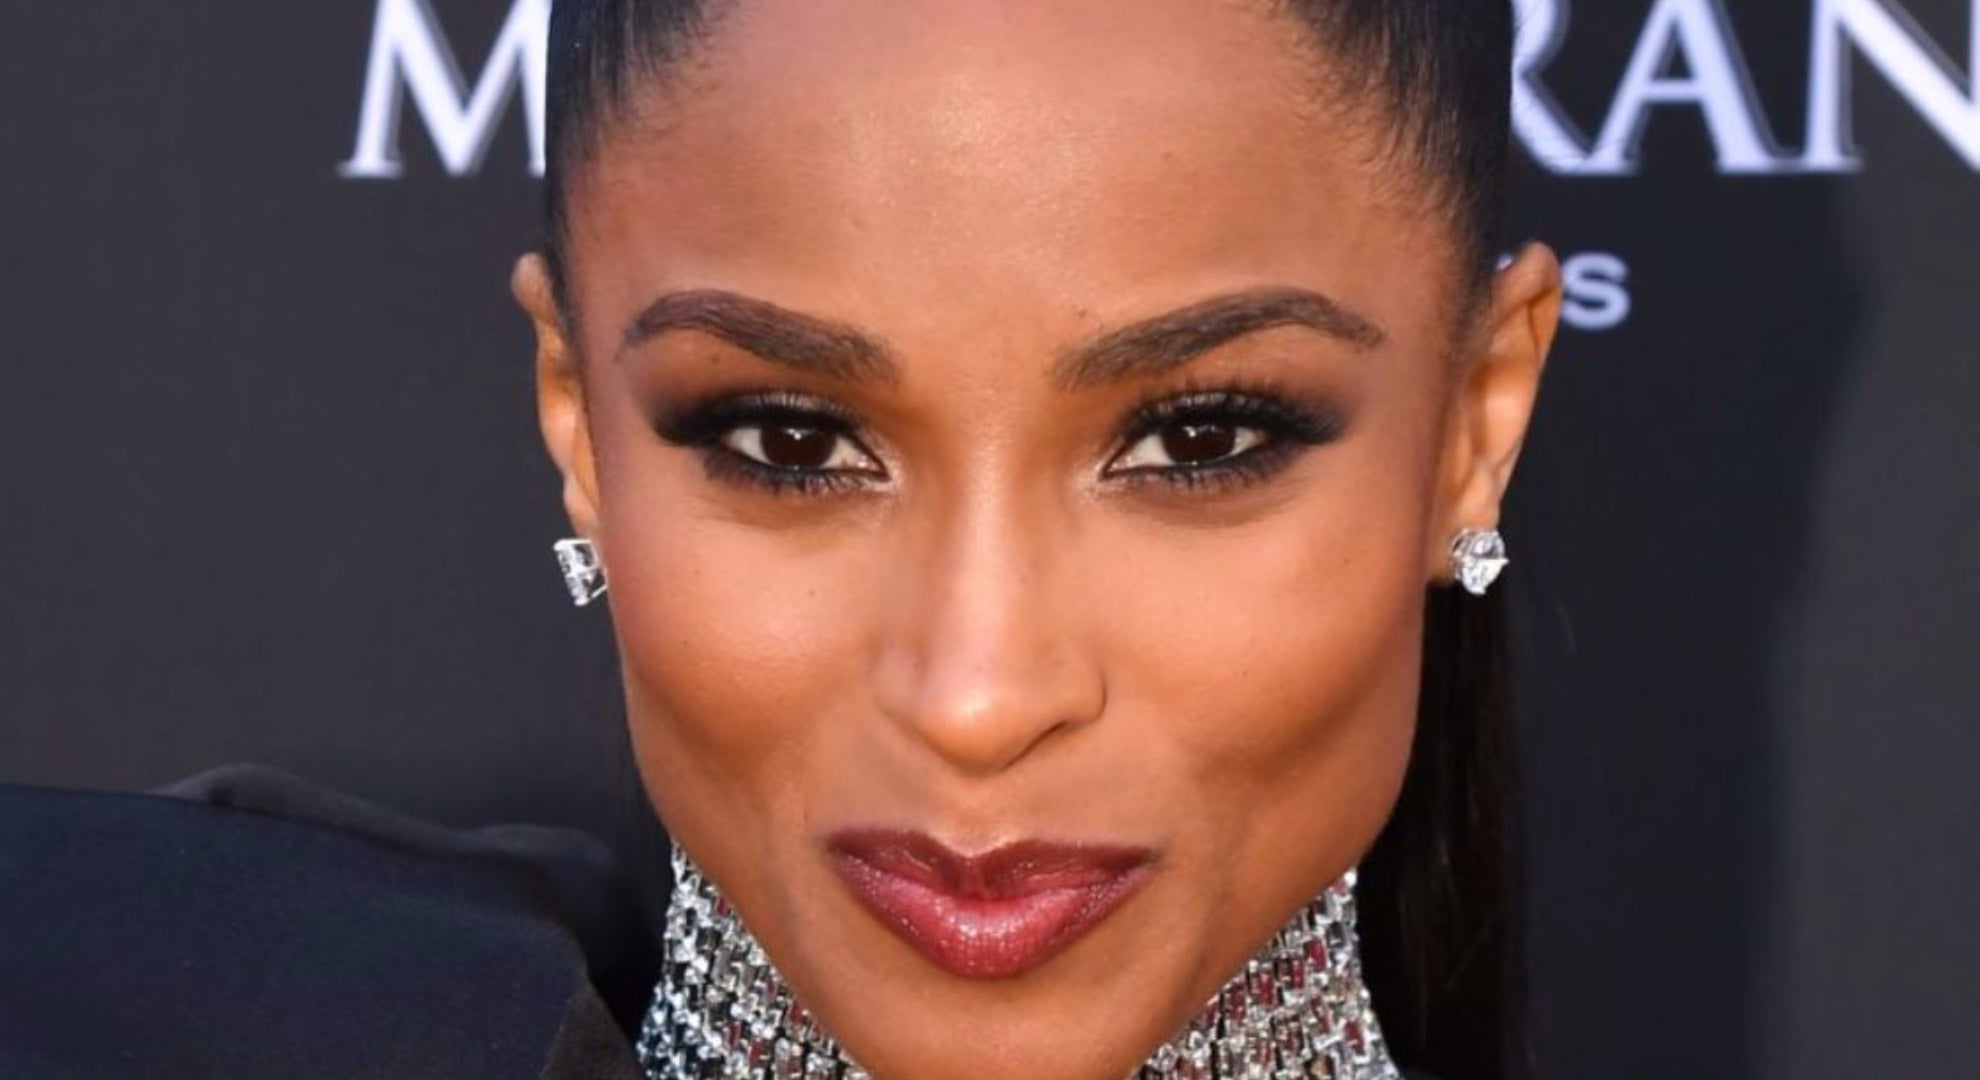 Ciara Has A New Haircut And You Have To See It Before It's Gone